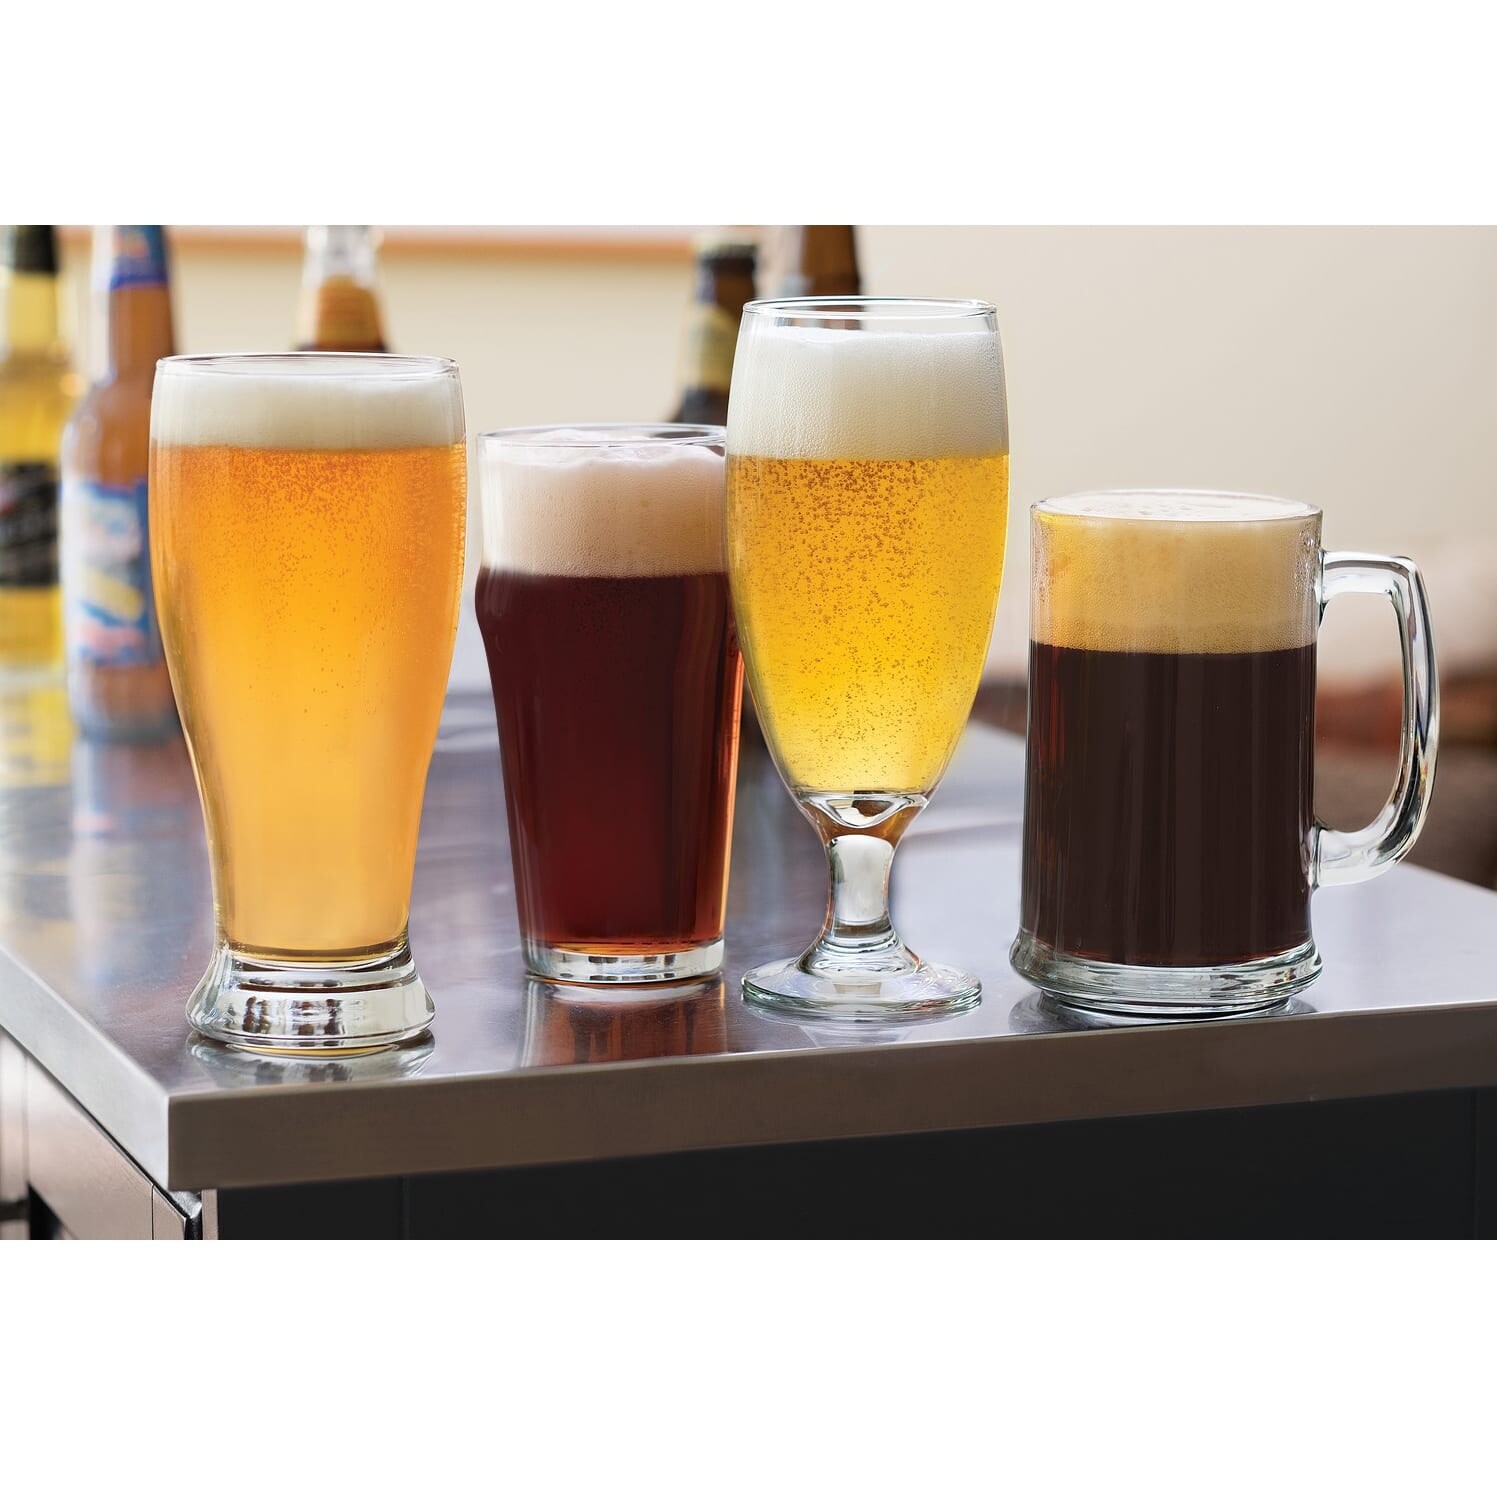 https://ak1.ostkcdn.com/images/products/is/images/direct/e92ce9e65e0fad54f8273d6cf77626f2e4ebe4a5/Libbey-Craft-Brews-Assorted-Beer-Glasses%2C-Set-of-4.jpg